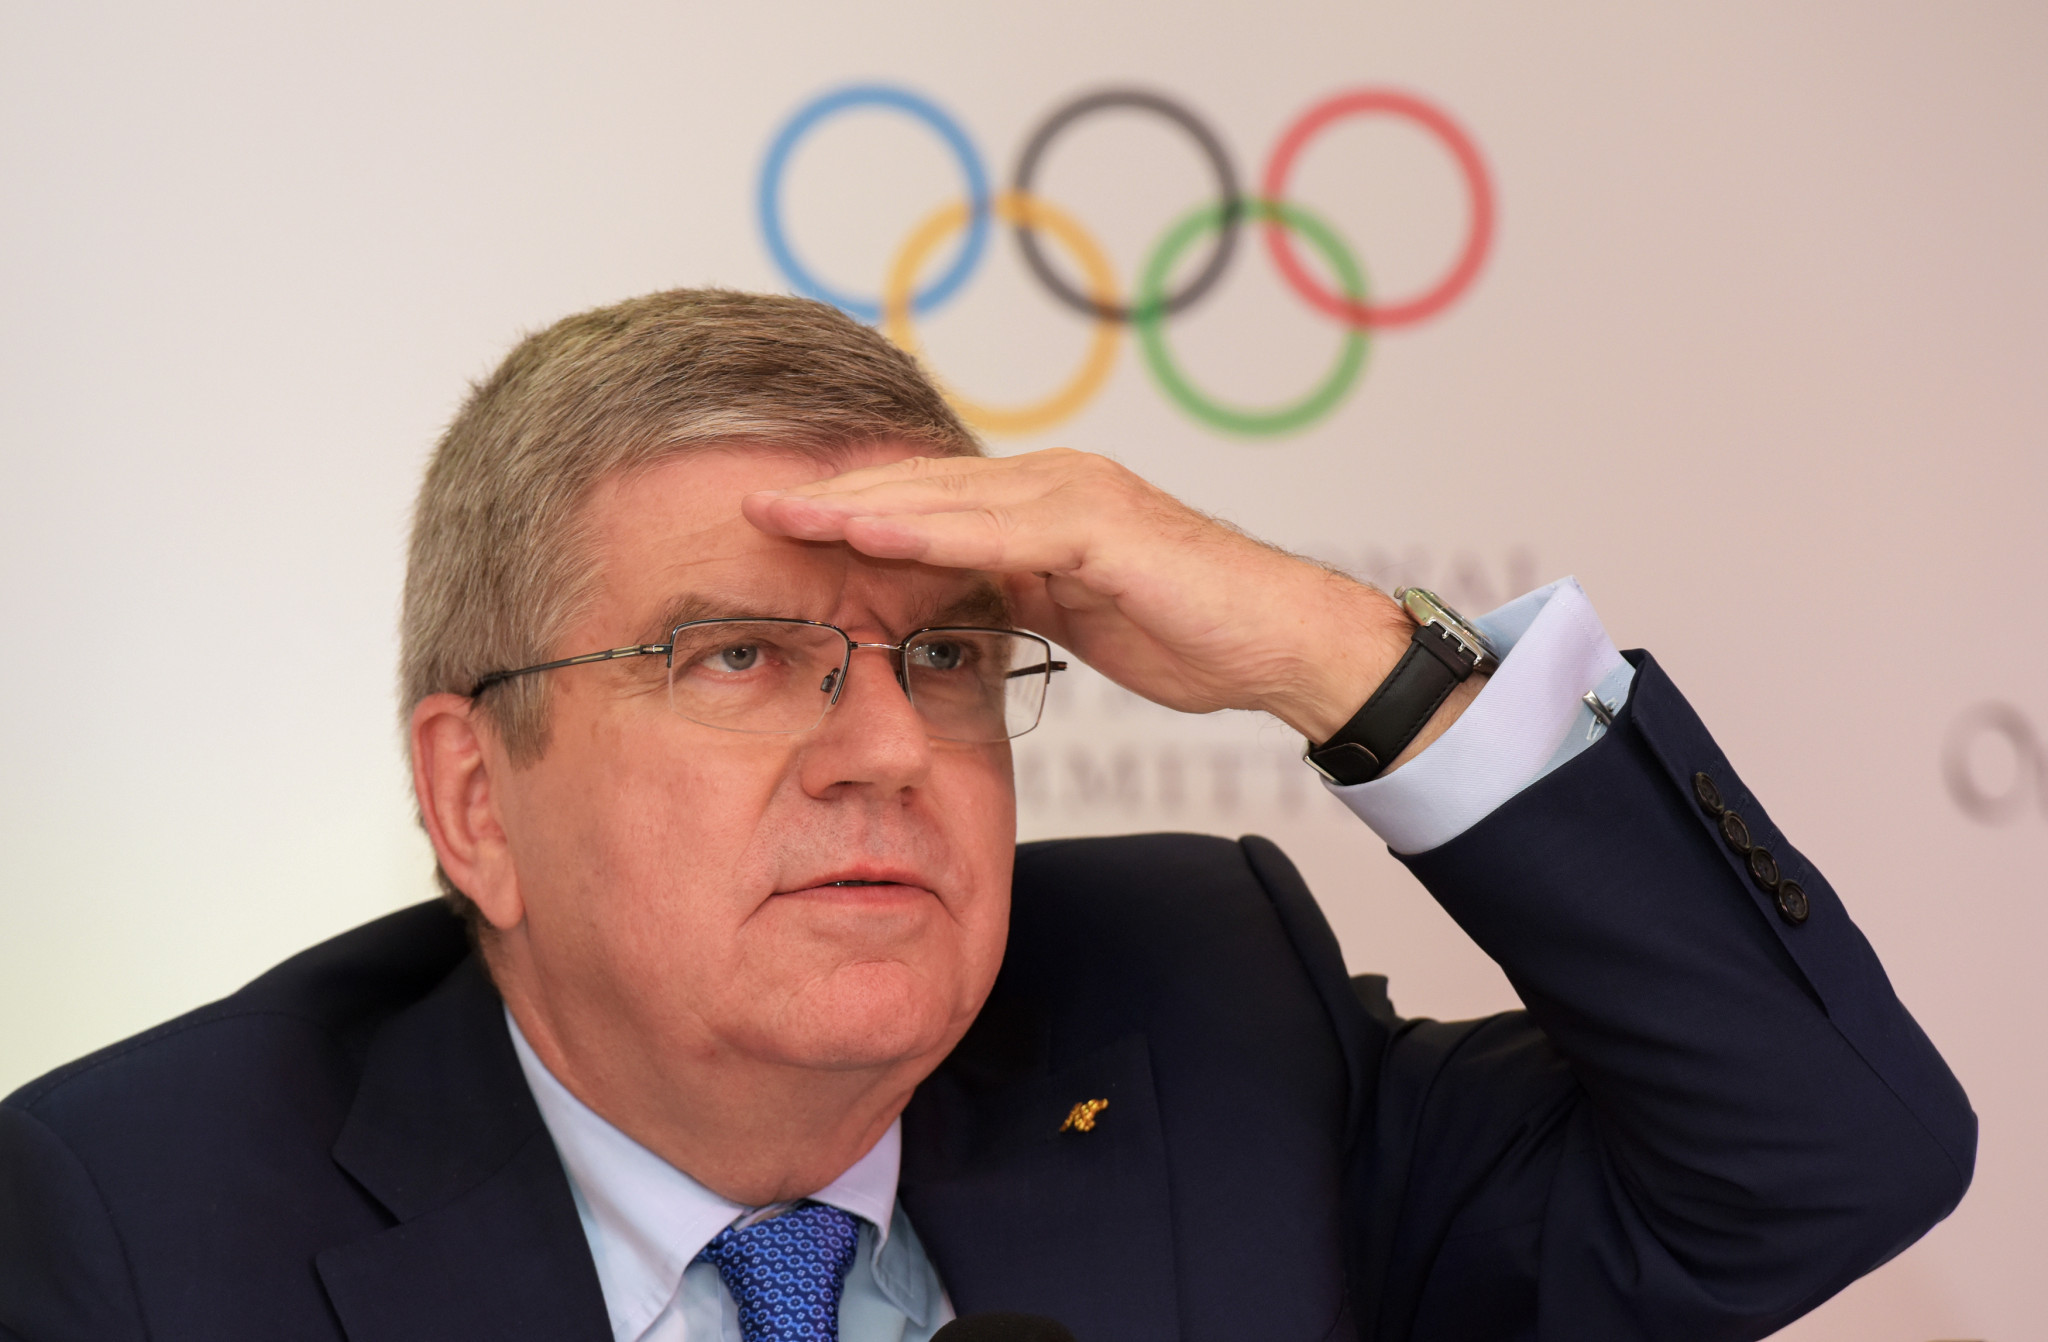 Bach invites German athletes to Lausanne to explain funding model